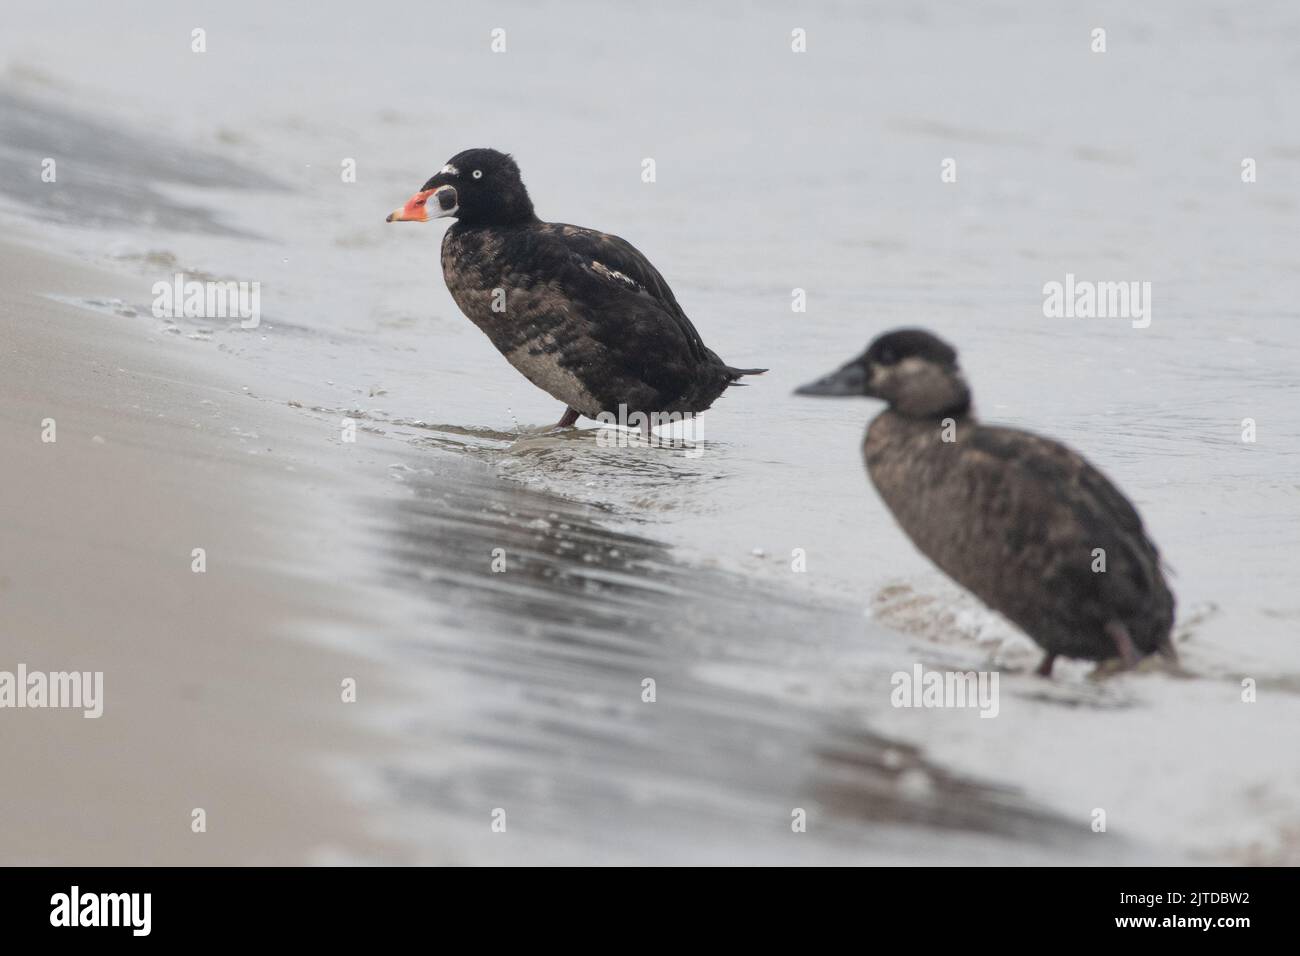 Surf scoter (Melanitta perspicillata) a sea duck from Point Reyes National seashore and the Farallones marine sanctuary in California. Stock Photo